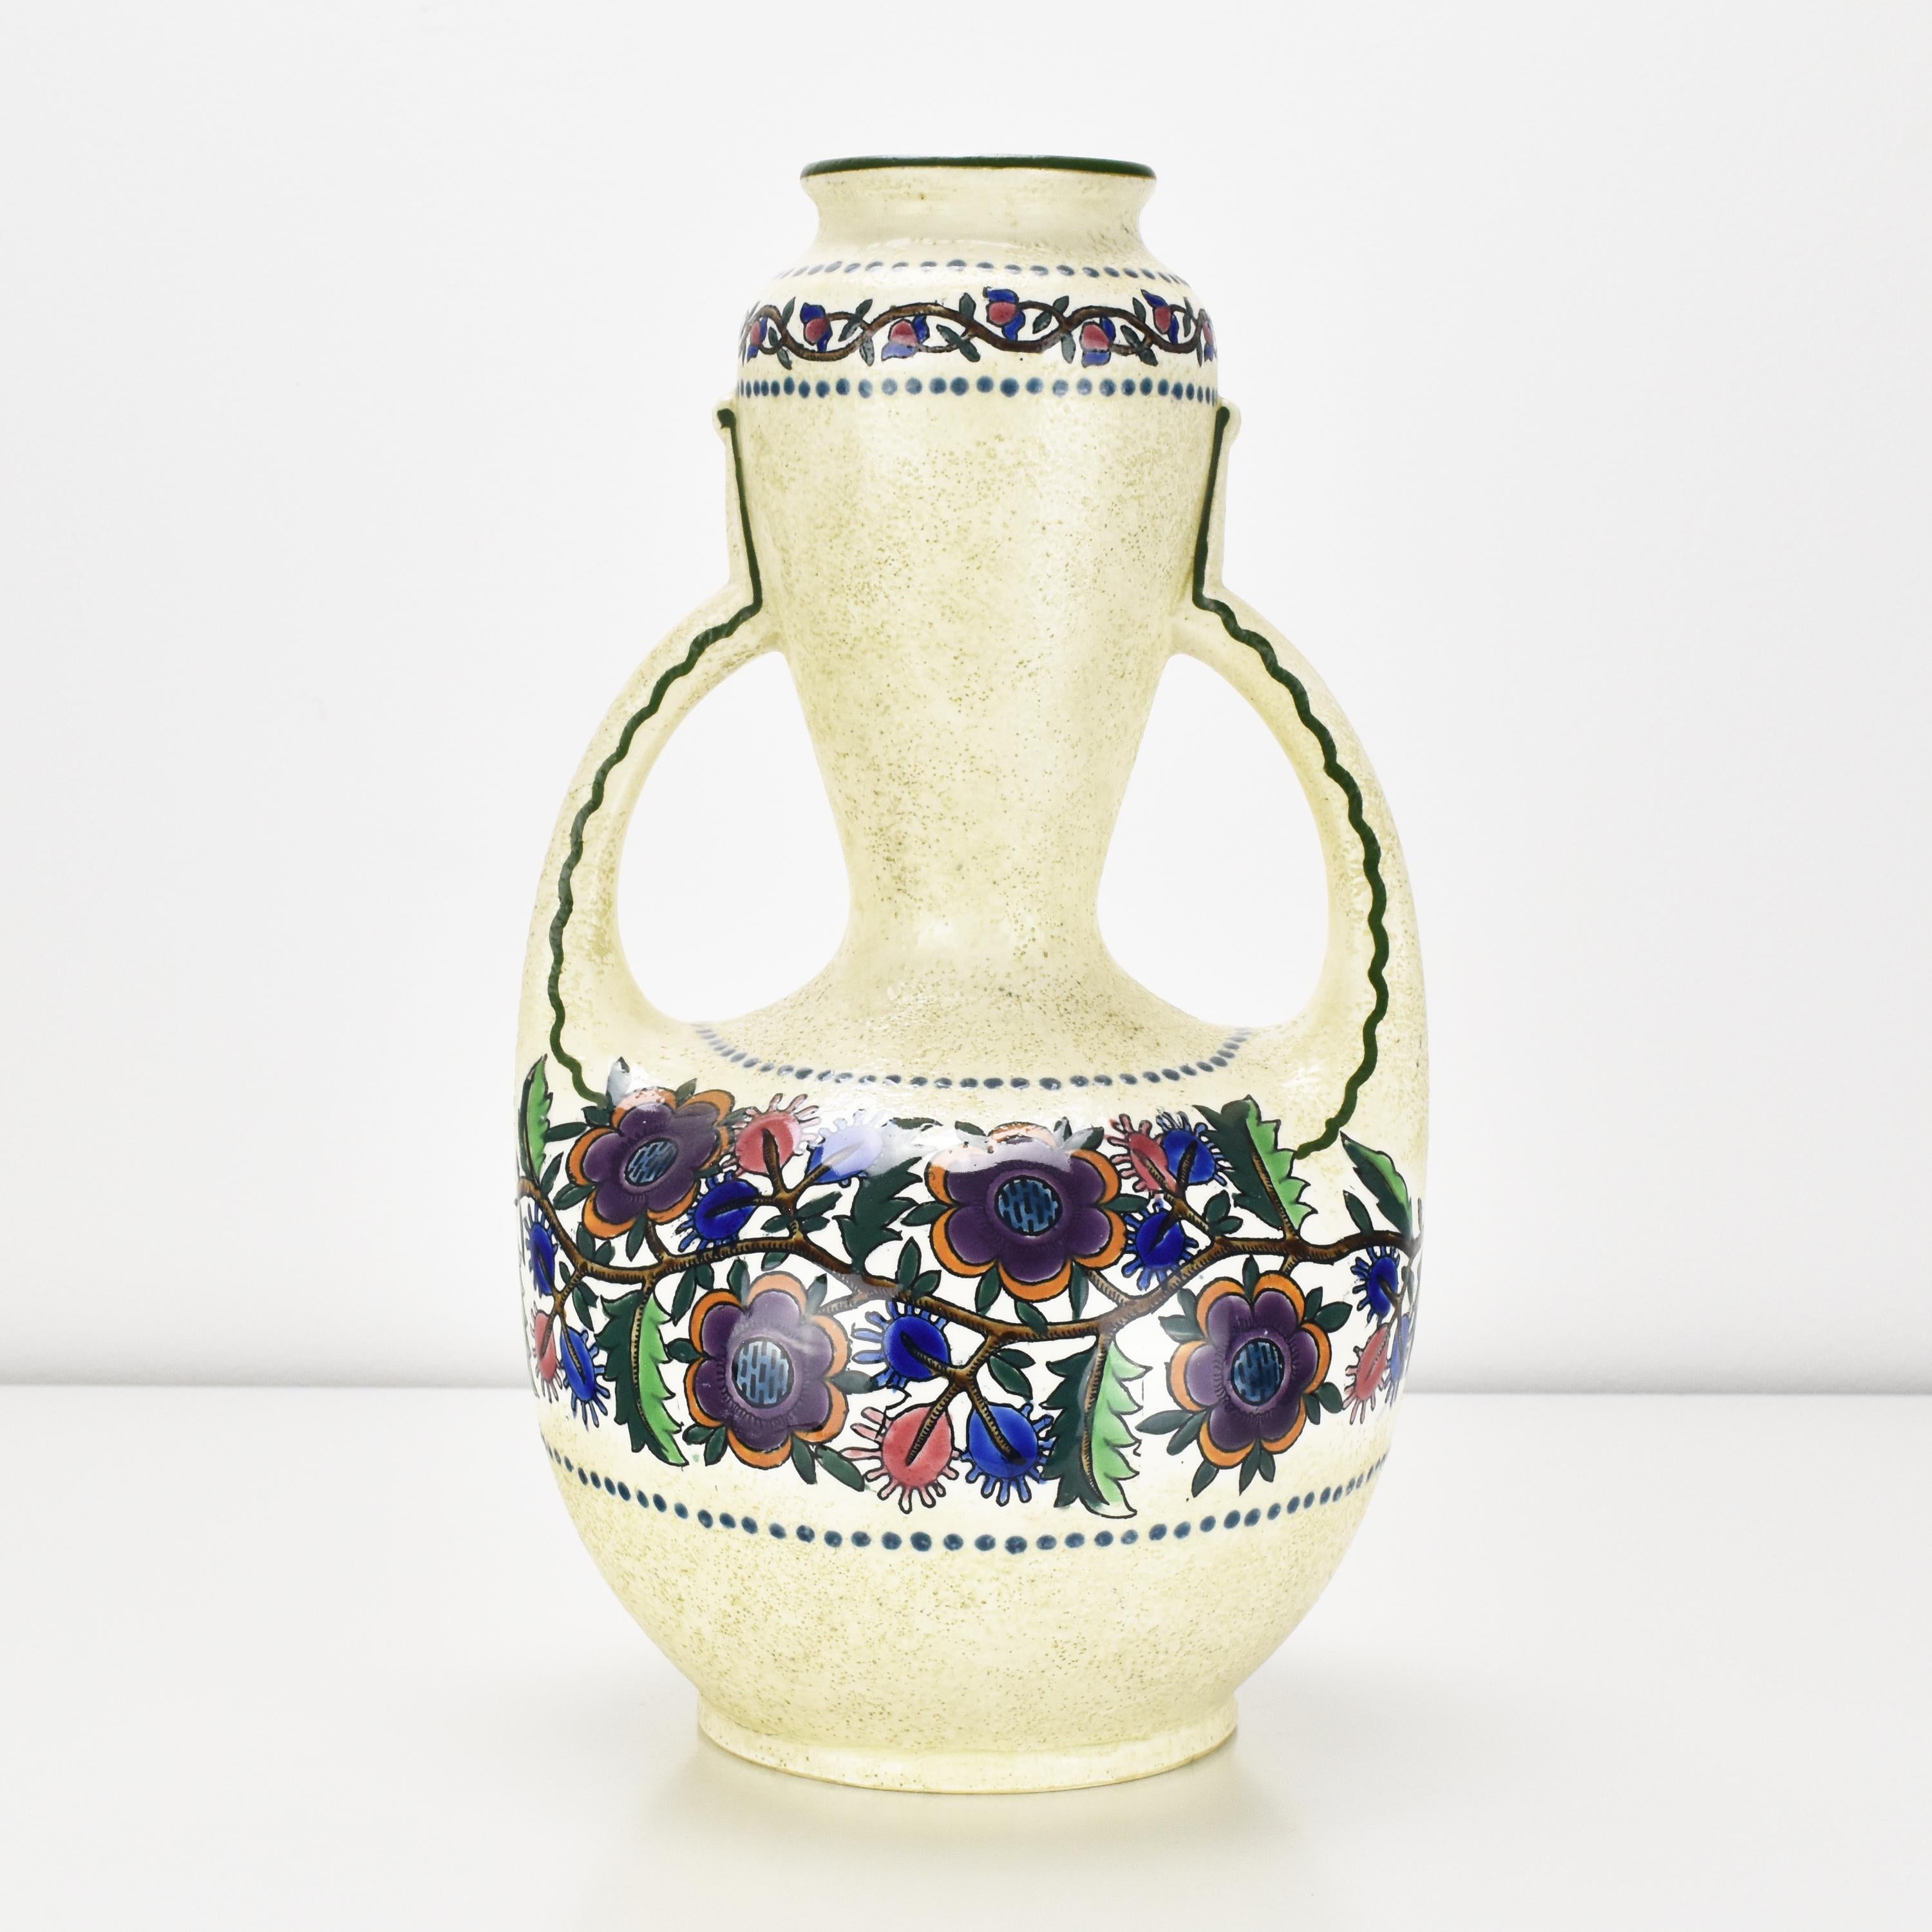 This large and unusual floral hand-decorated double-handled ceramic vase by Ampora Turn-Teplitz showcases the characteristic artistic sensibilities of the Art Nouveau Vienna Secessionist era, with a focus on organic forms and natural motifs.

The